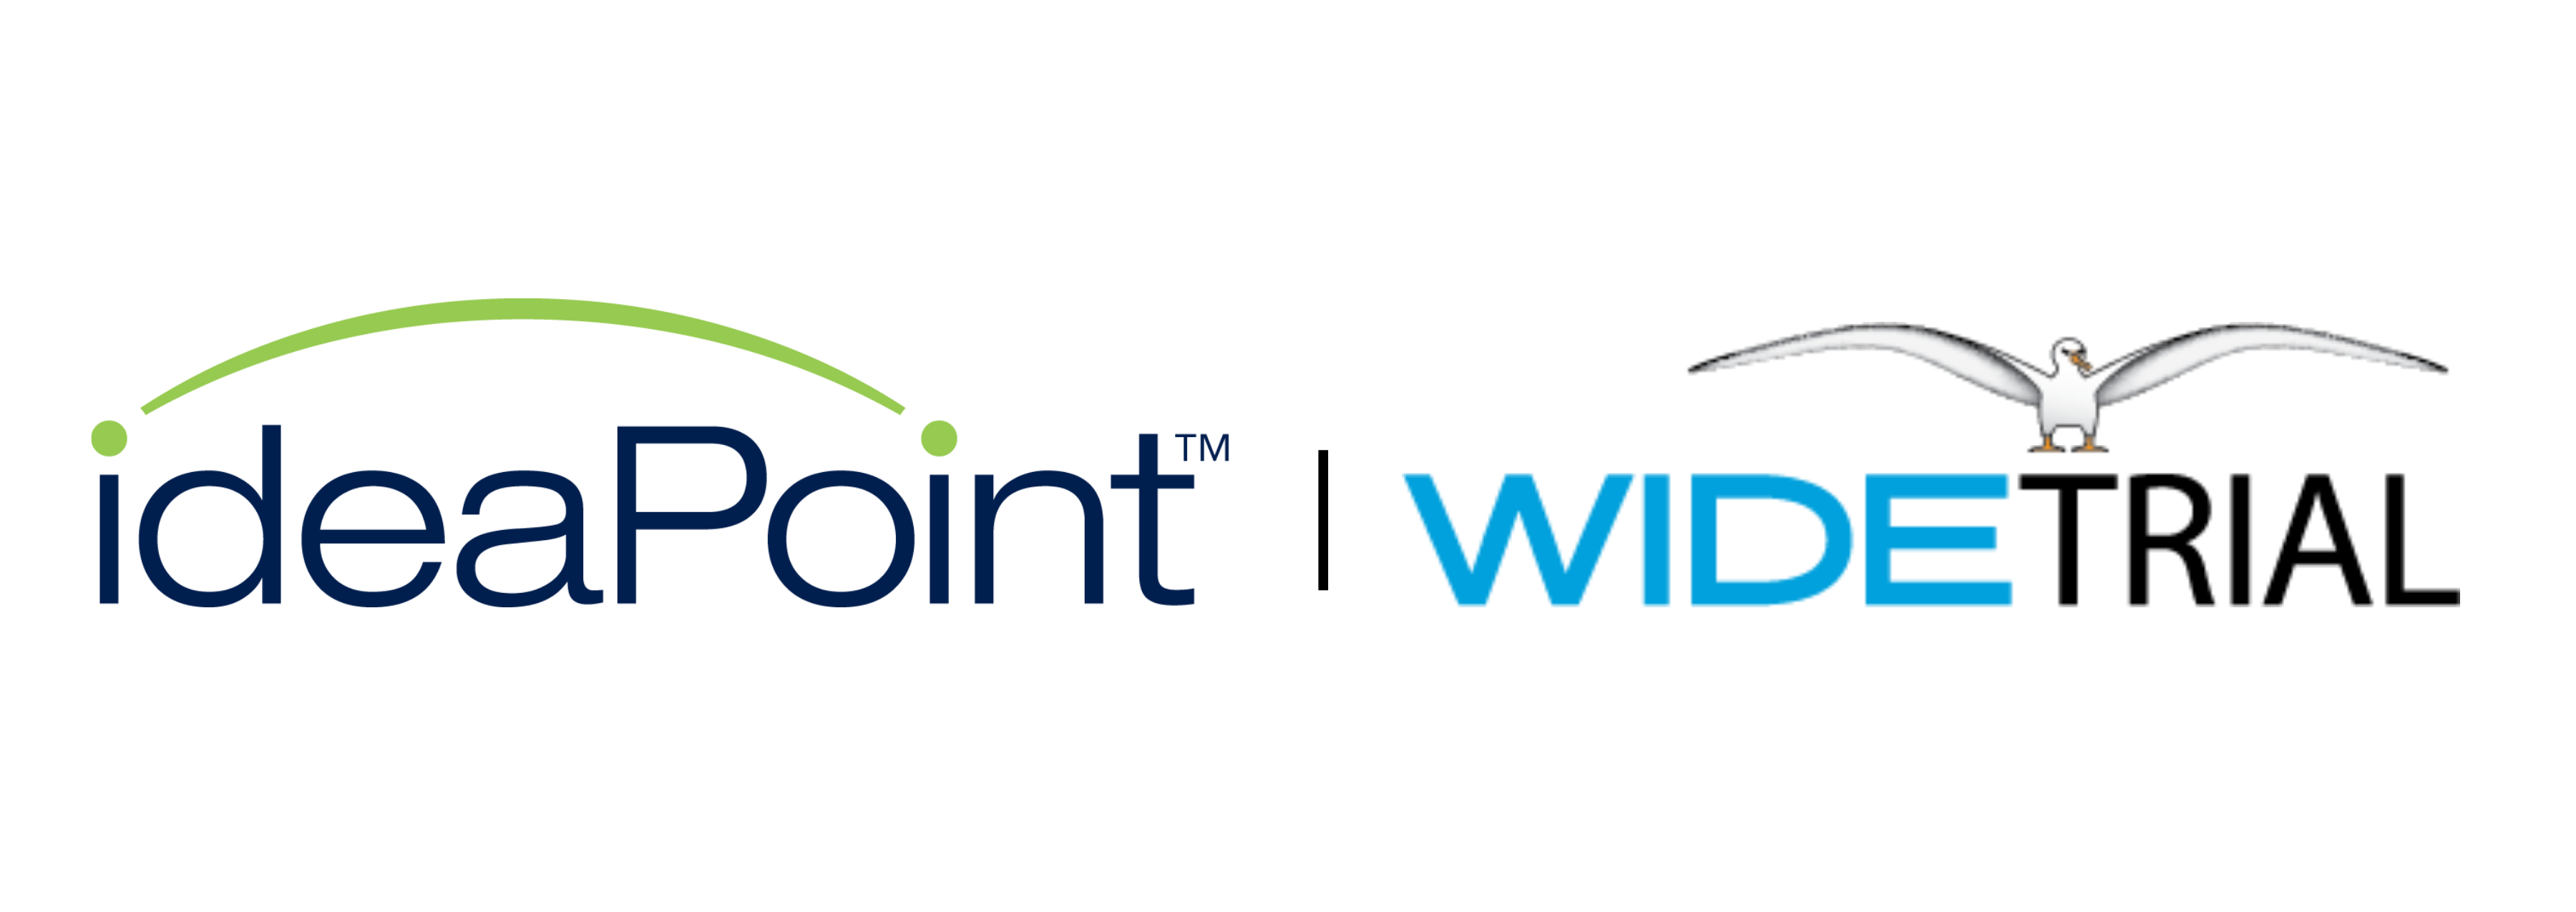 ideaPoint and WideTrial Logo No Bkgrnd (1).png